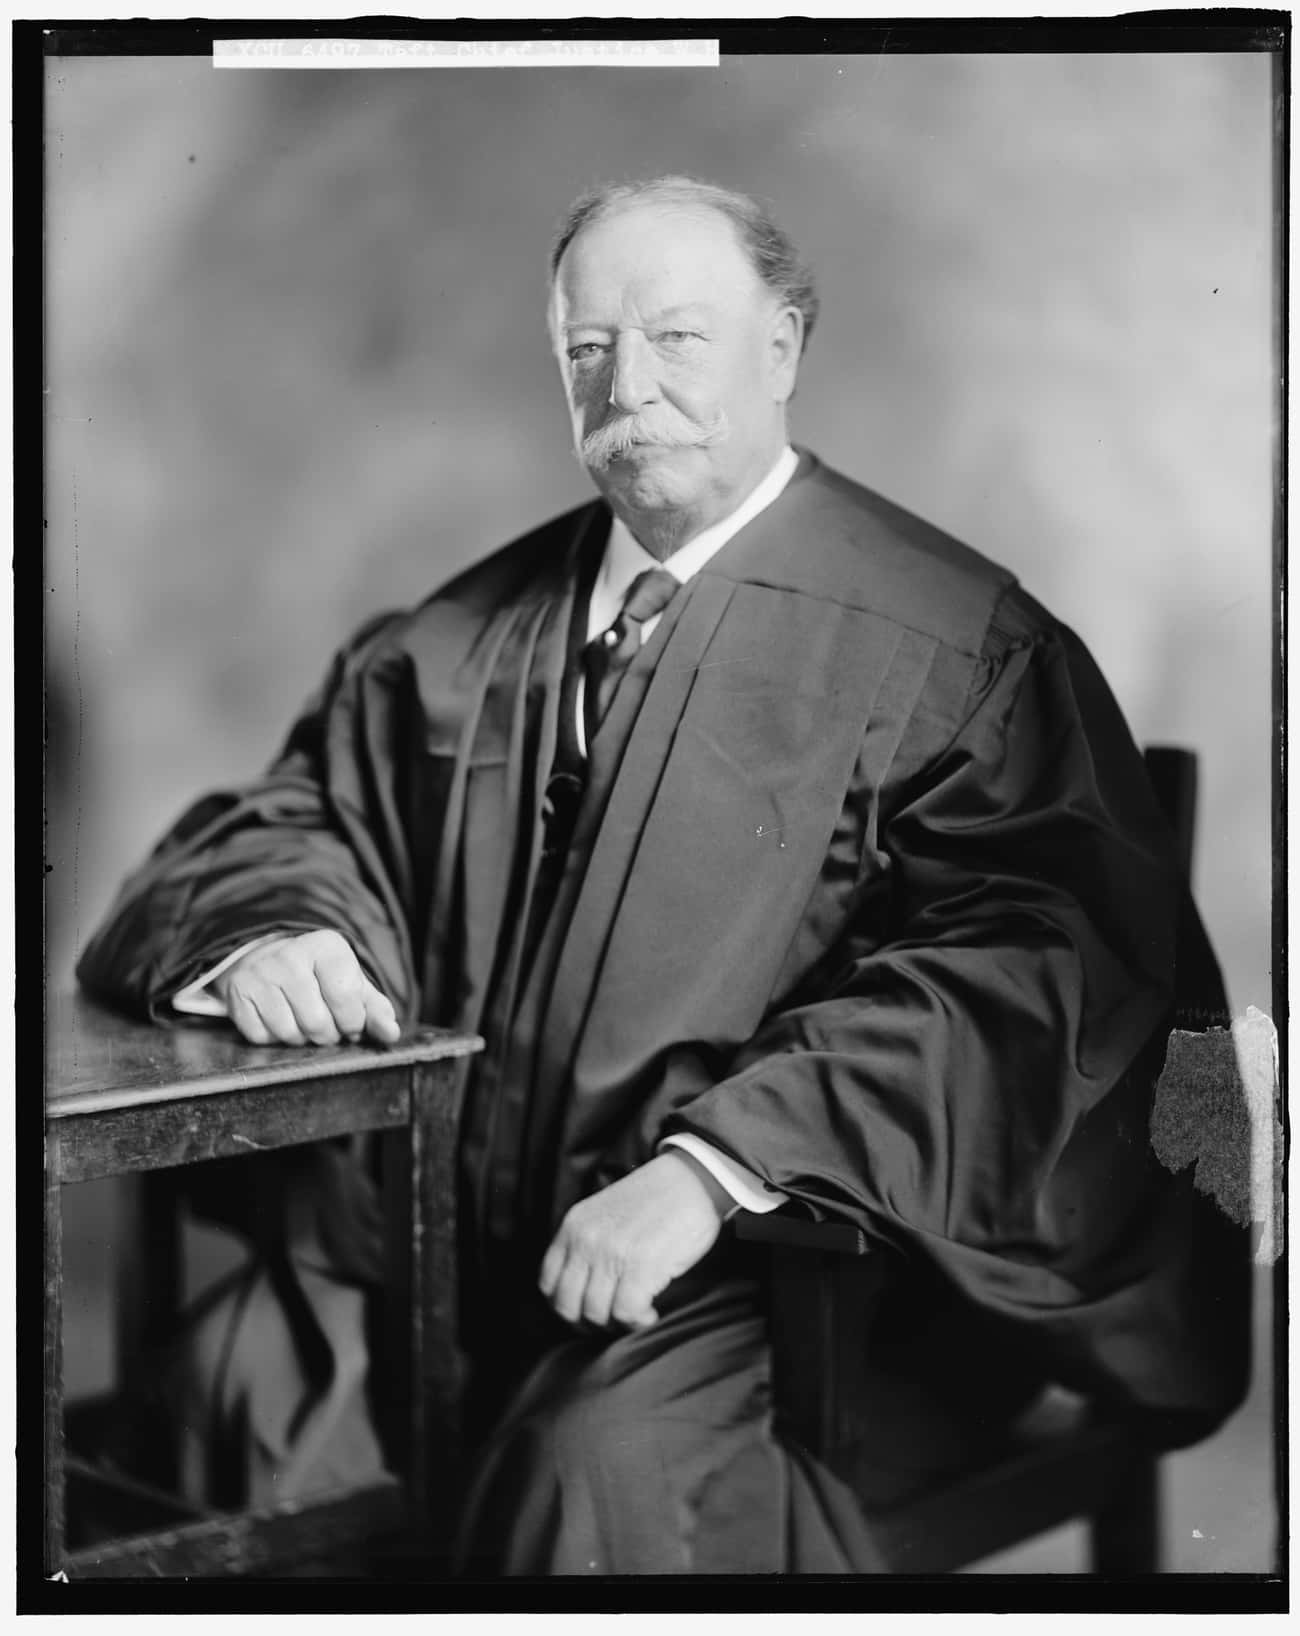 William Howard Taft - Became Chief Justice Of The Supreme Court